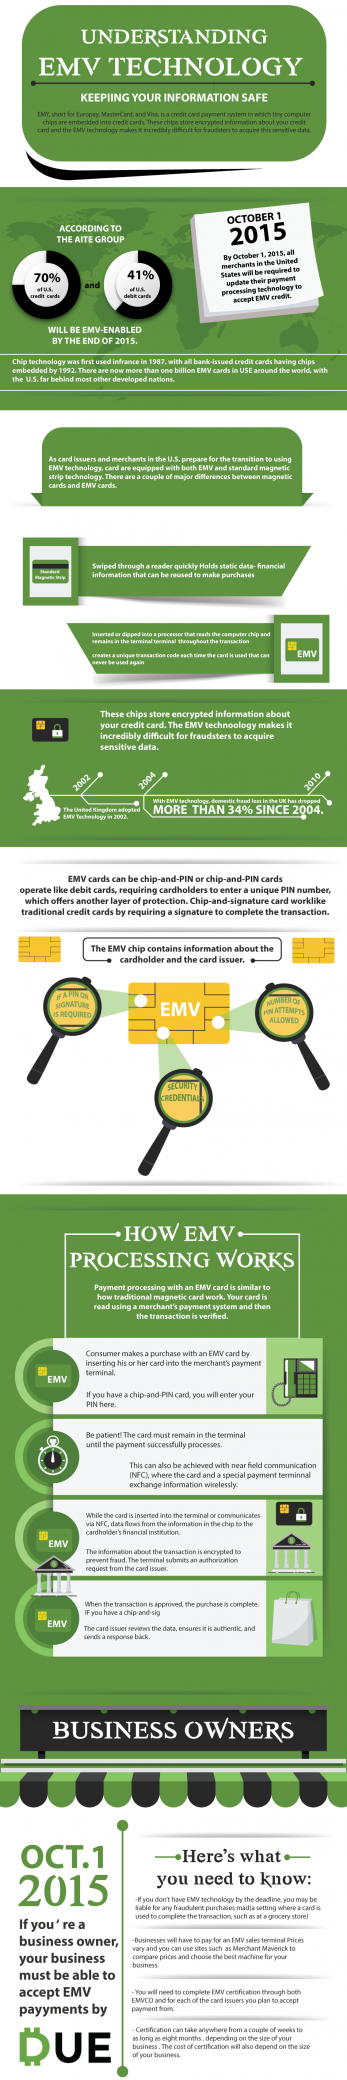 Understanding EMV Technology as a Business Owner [Infographic]